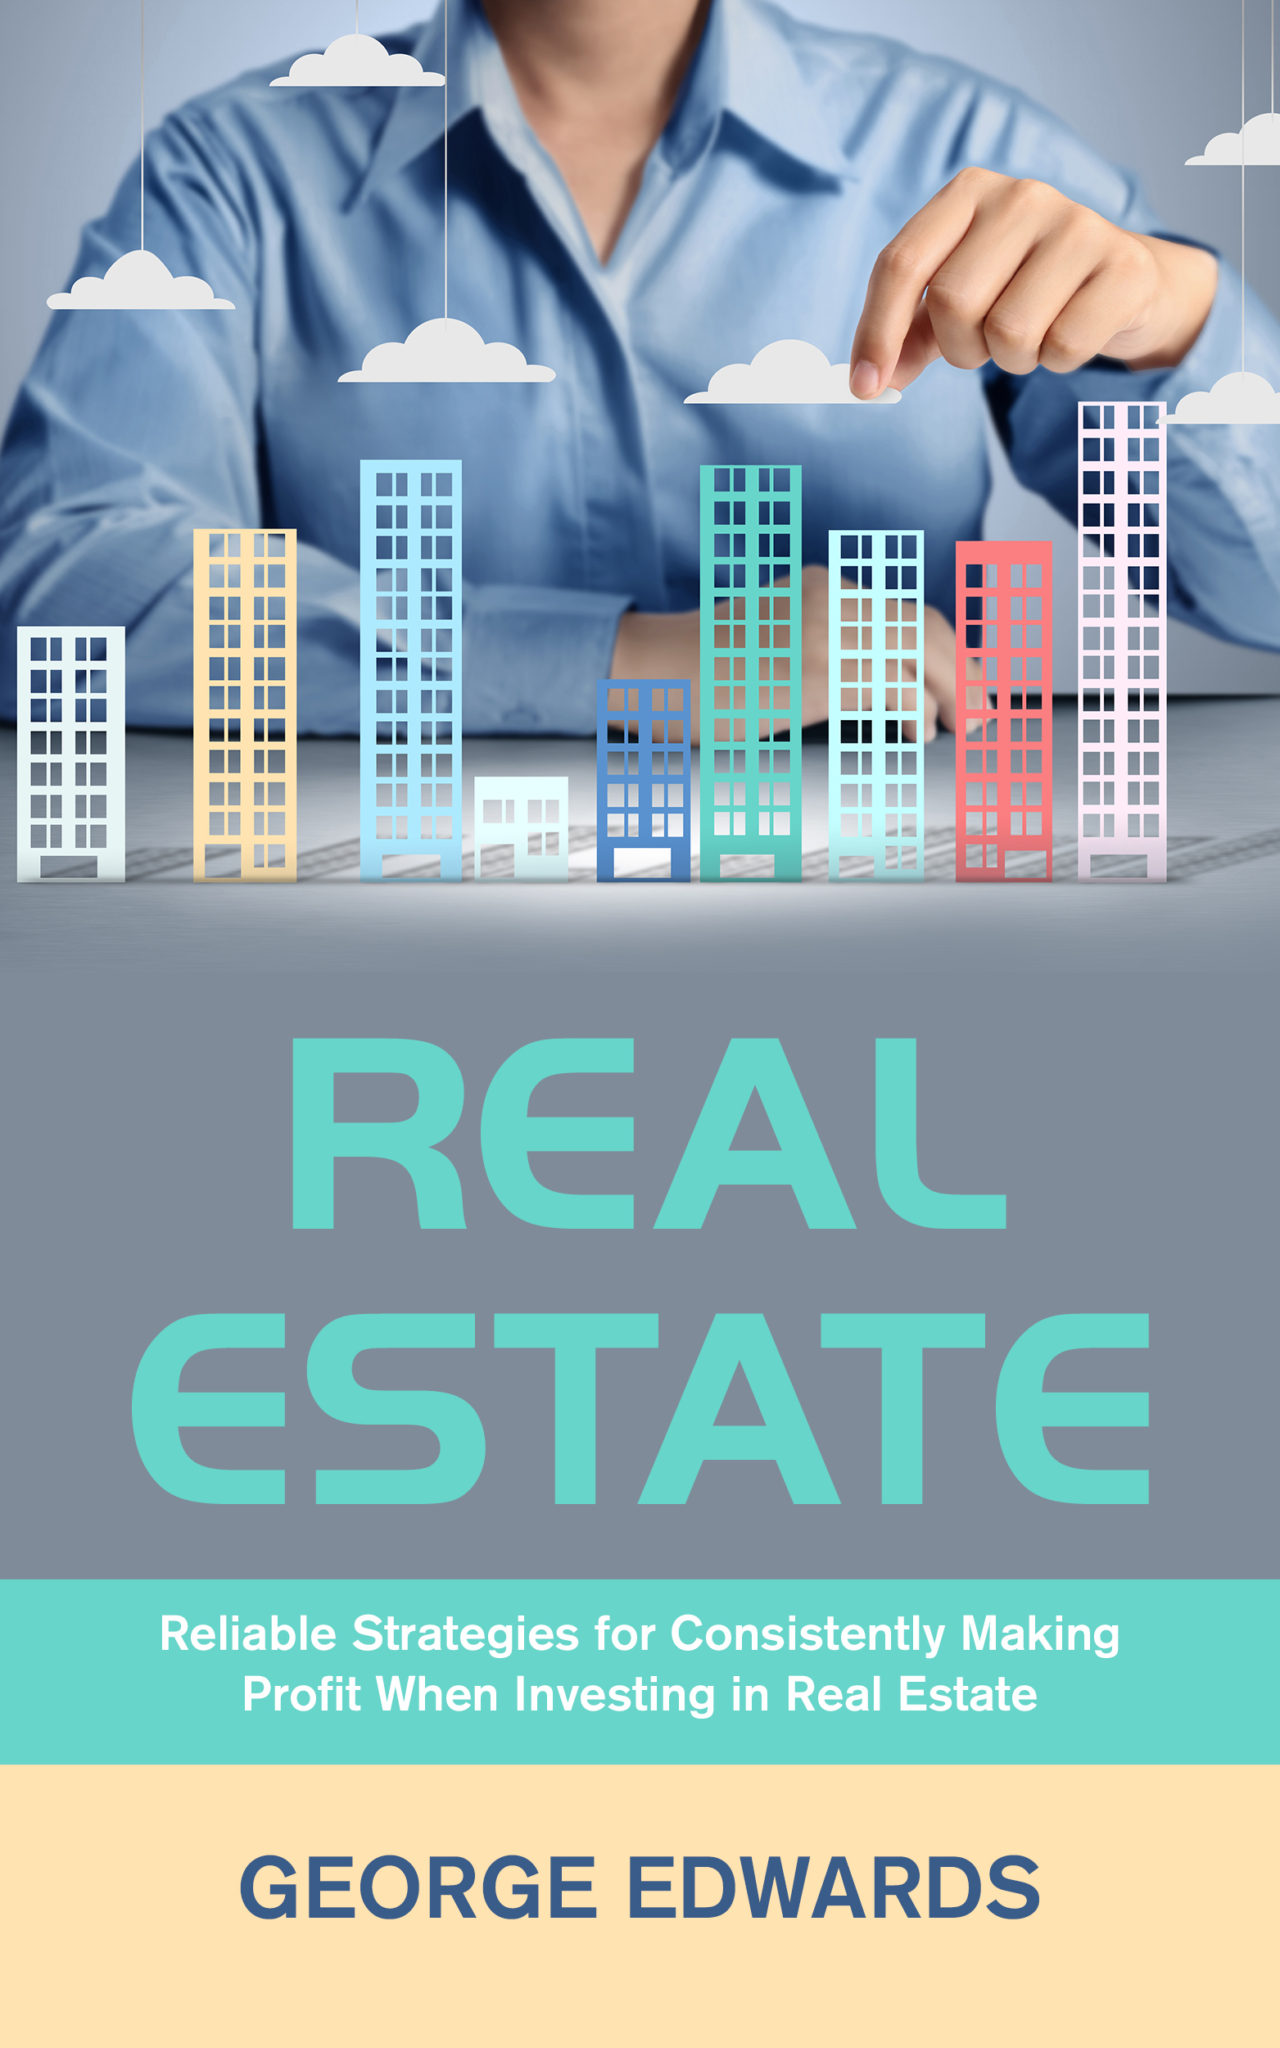 FREE: Real Estate: Reliable Strategies for Consistently Making Profit When Investing in Real Estate by George Edwards